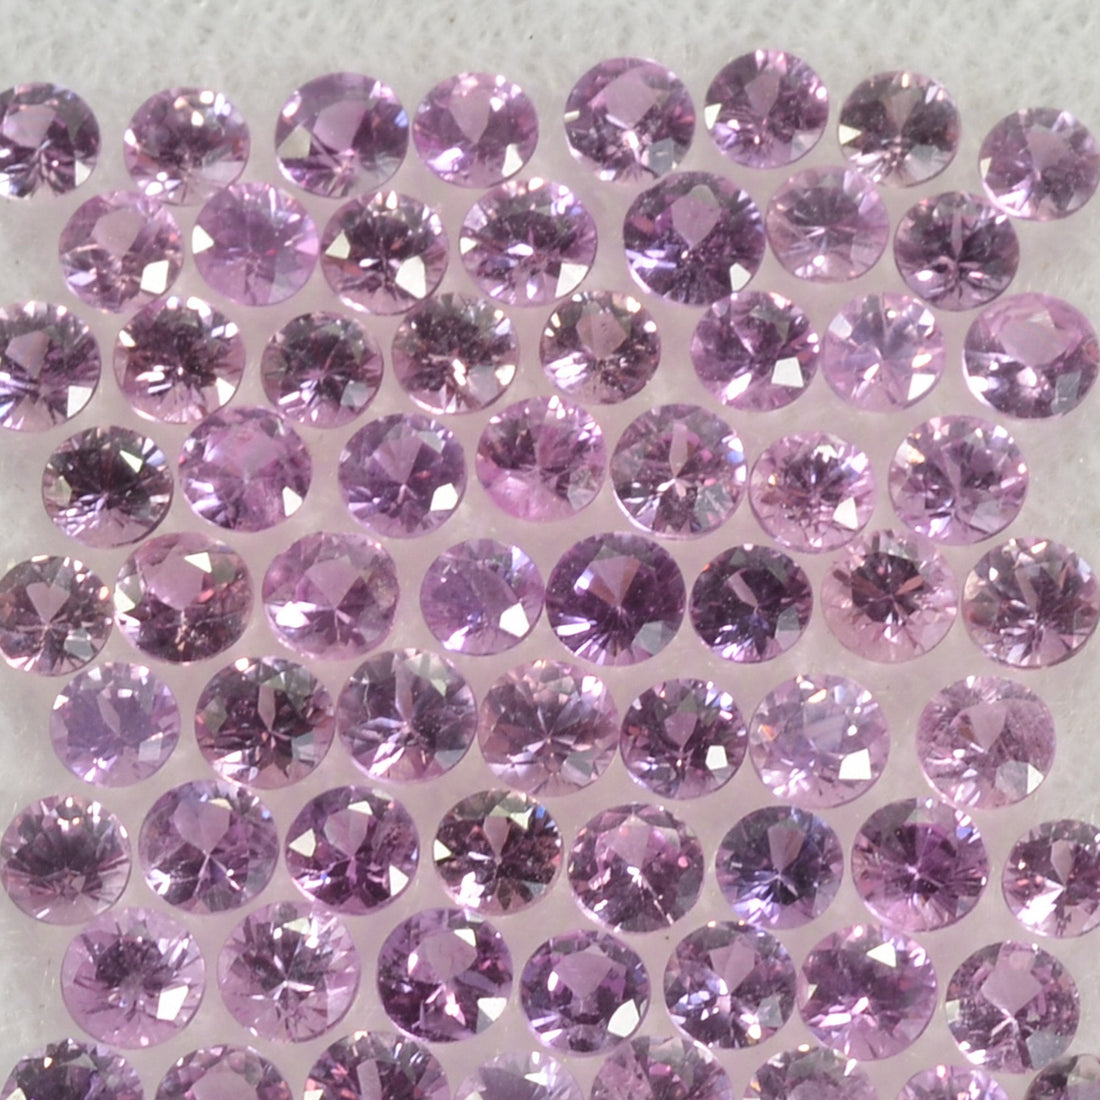 1.1-3.6 mm Natural Pink Sapphire Loose Gemstone Round Diamond Cut Cleanish Quality